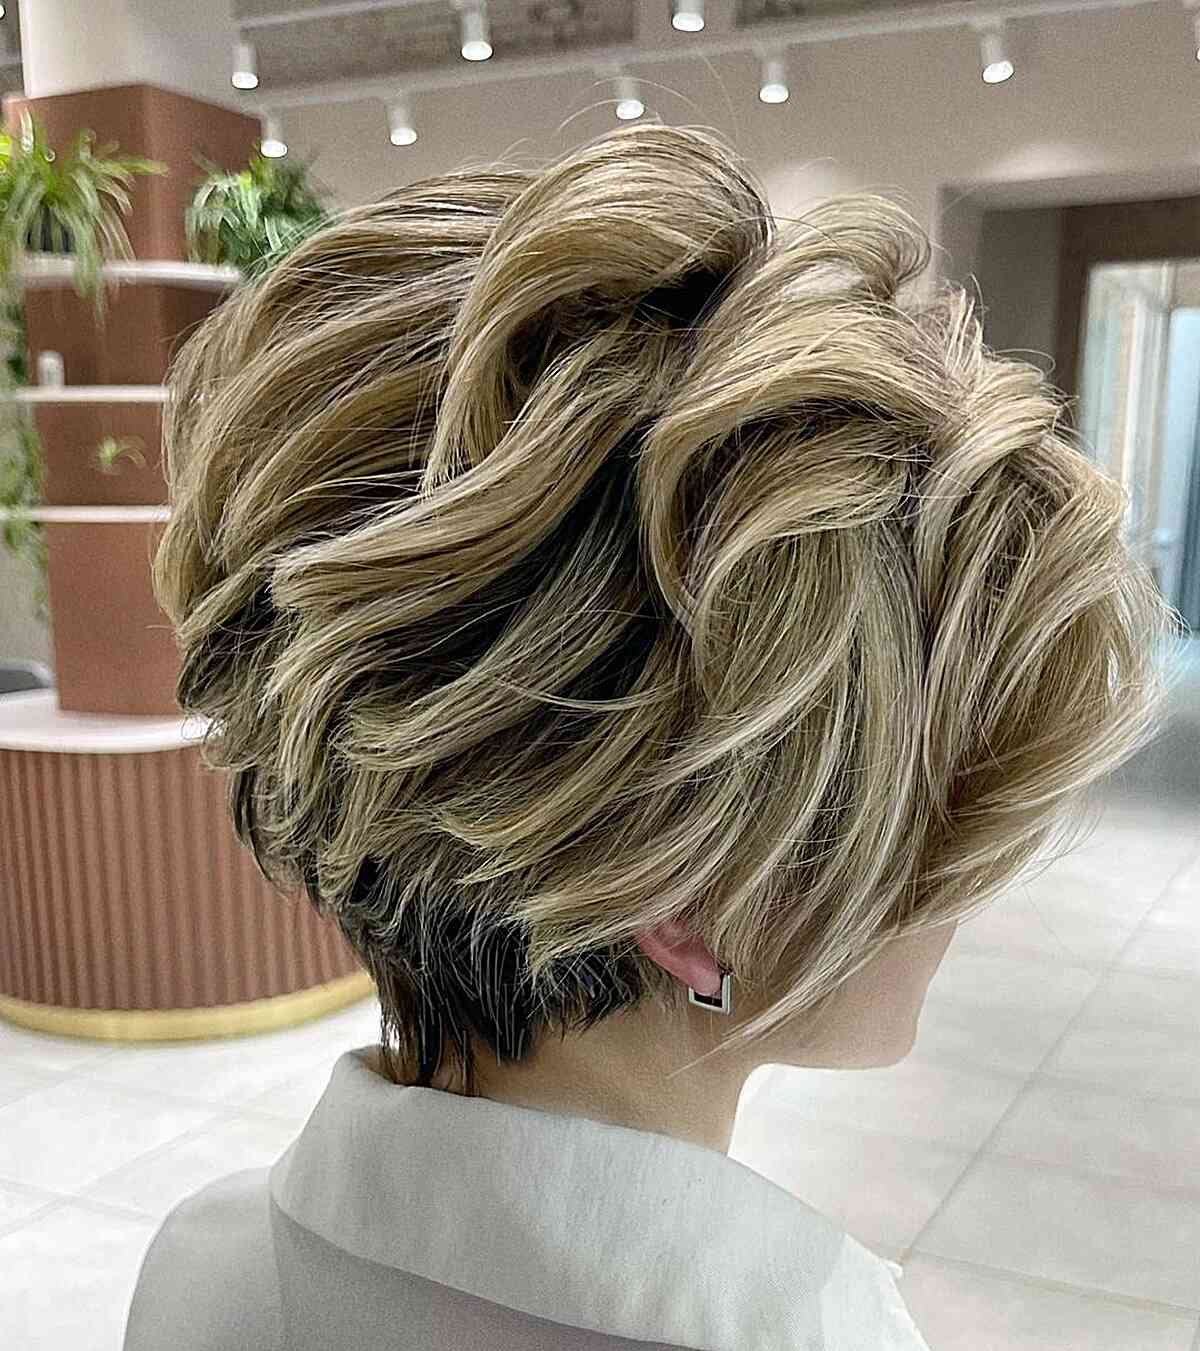 Visible Layers on a Long Pixie Bob Cut with blonde highlights and dark roots